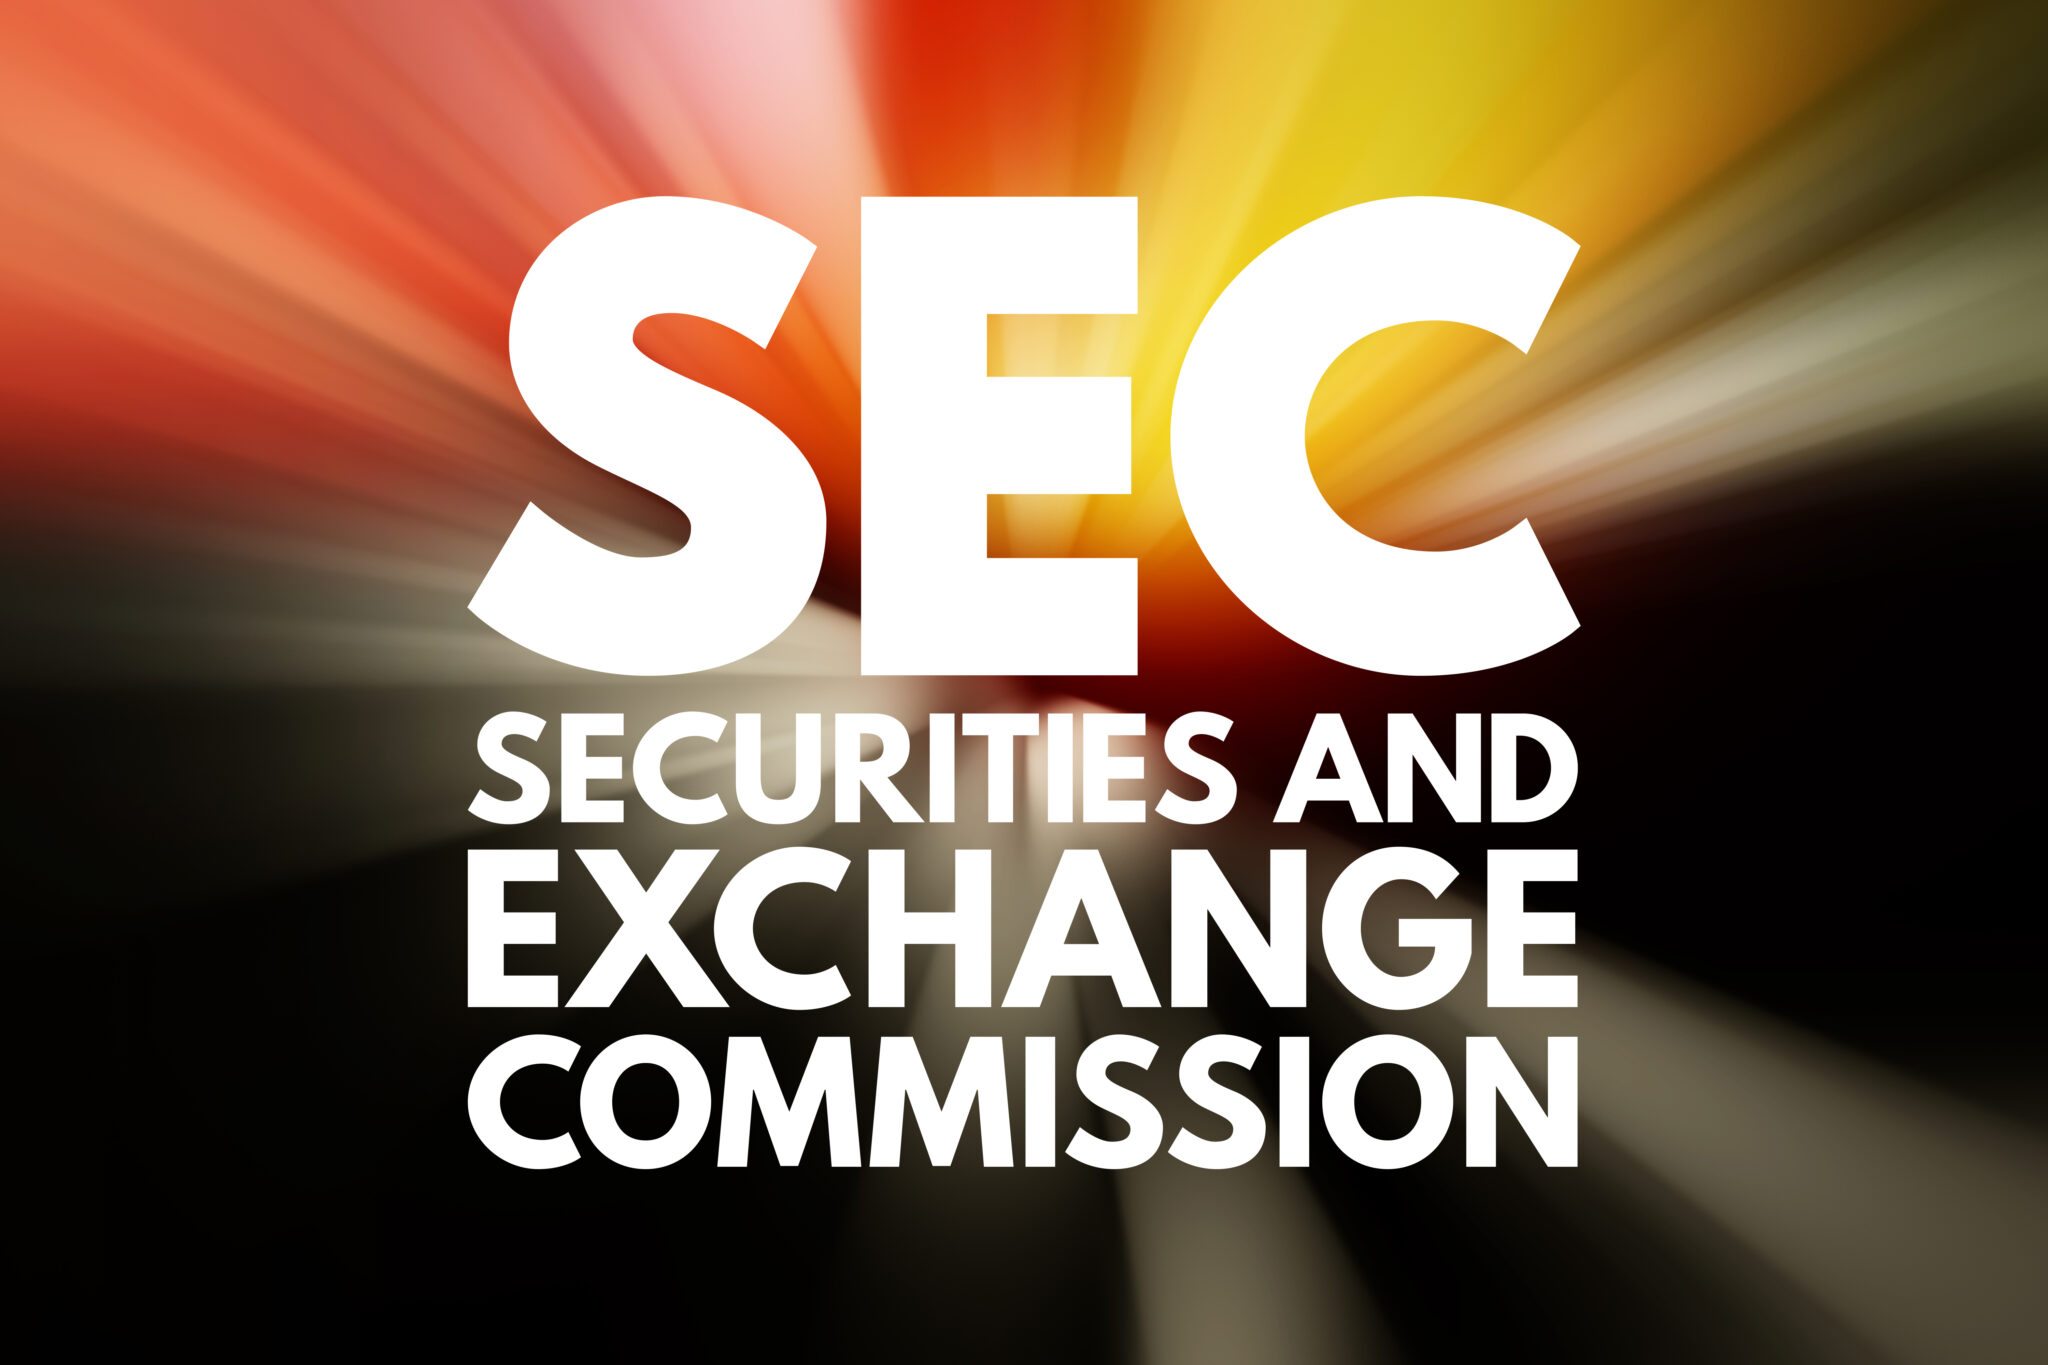 SEC - Securities and Exchange Commission acronym, business concept background